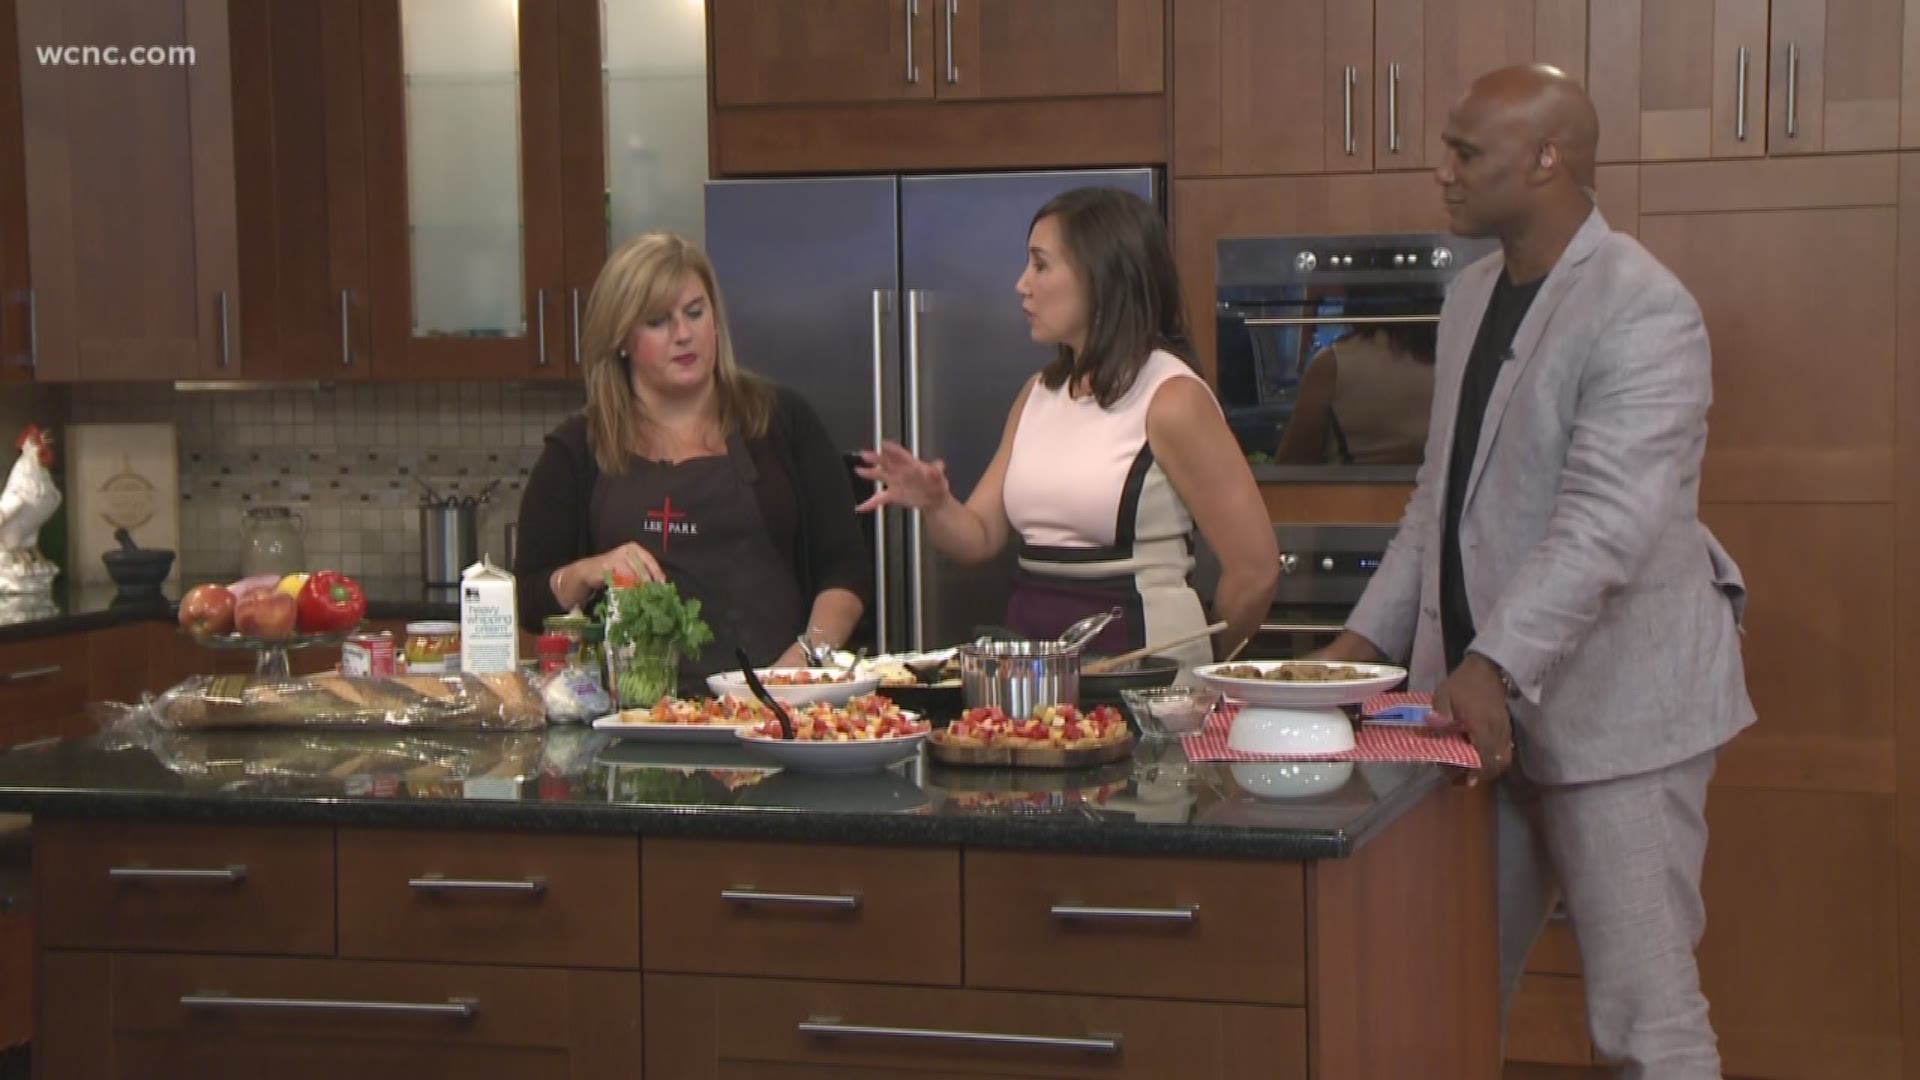 Becky Justice shares 3 easy recipes